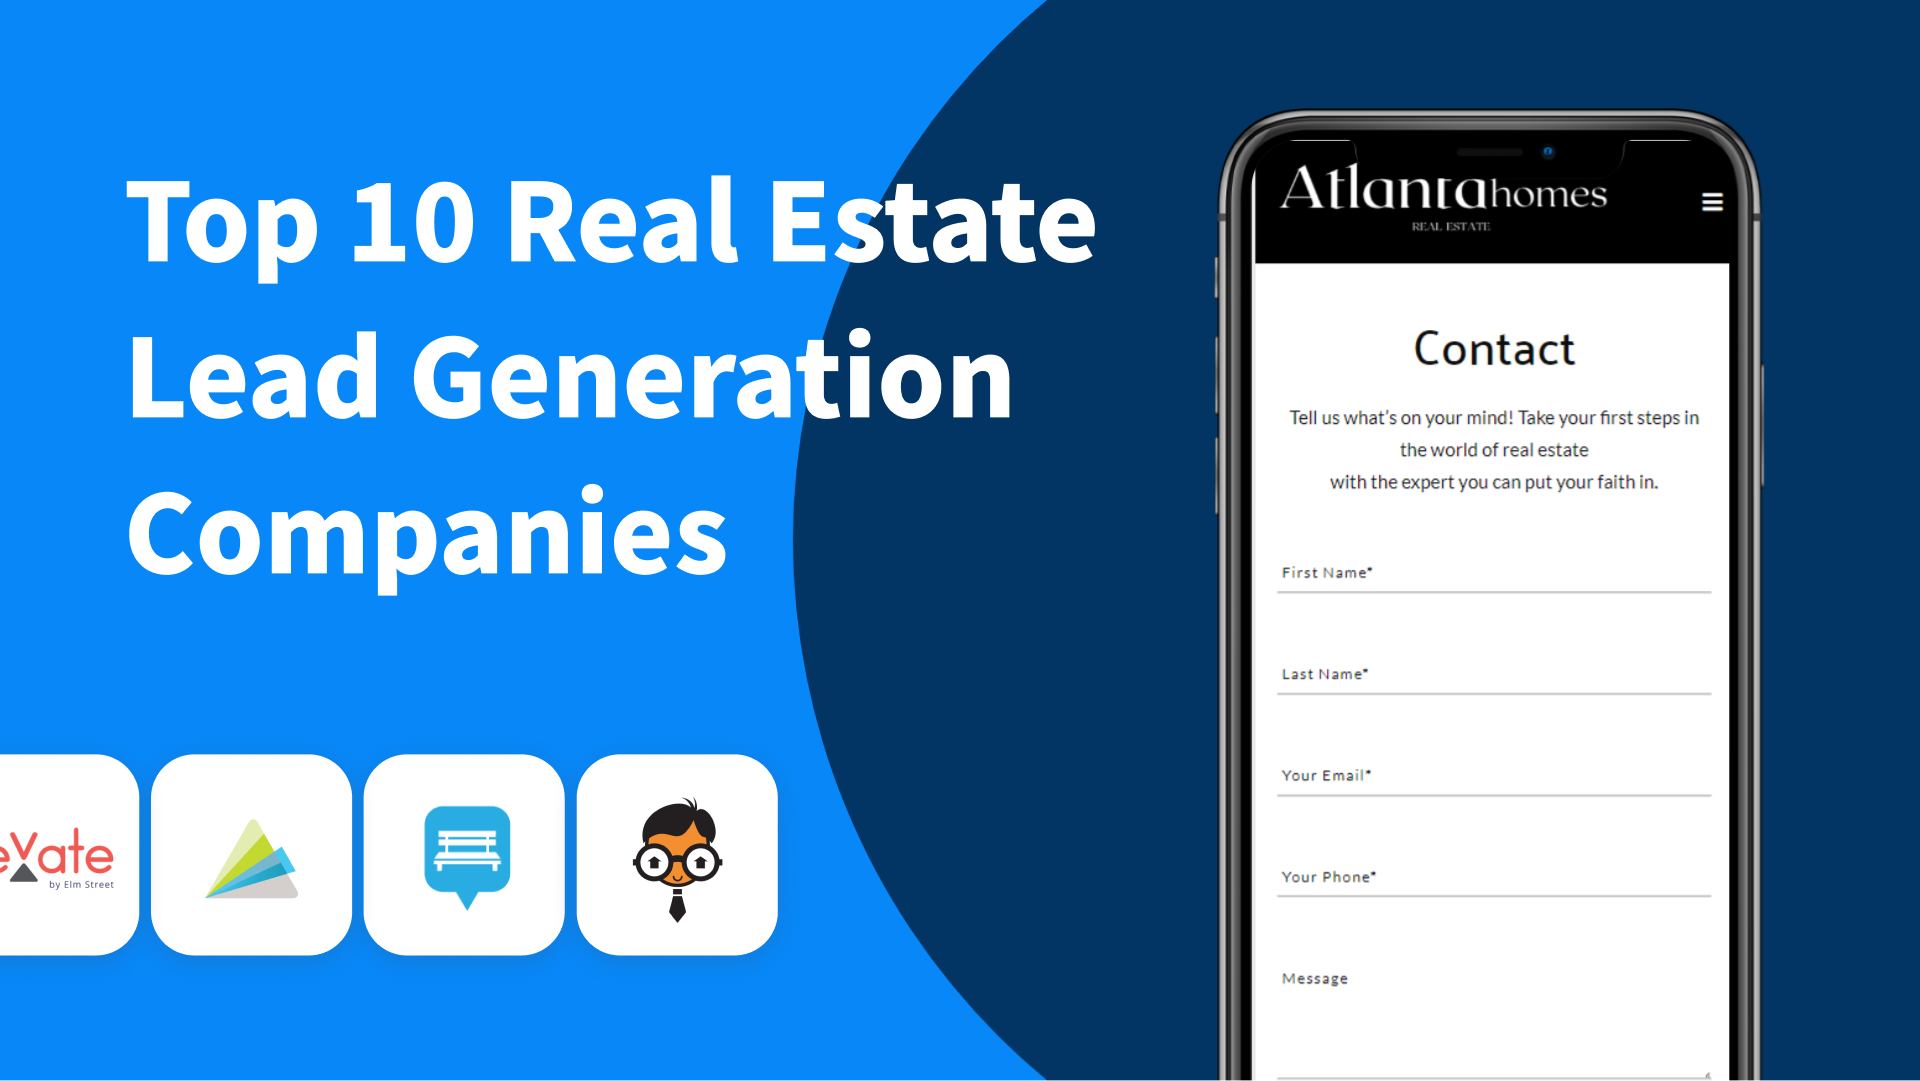 Top 10 Real Estate Lead Generation Companies